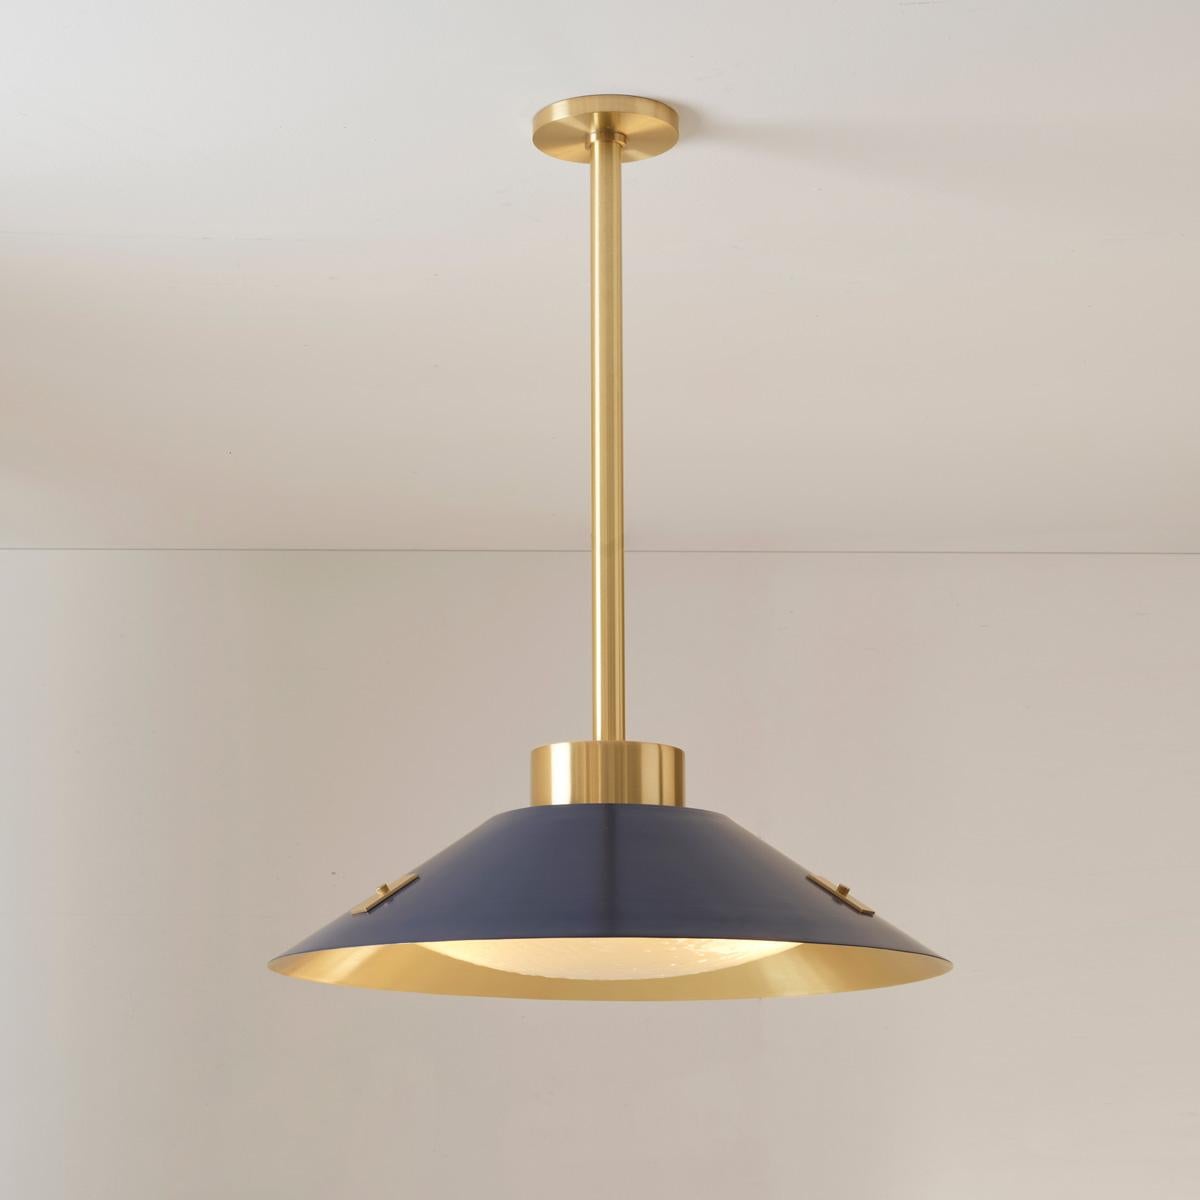 Kono Pendant by Gaspare Asaro. Satin Brass and Sand White For Sale 1